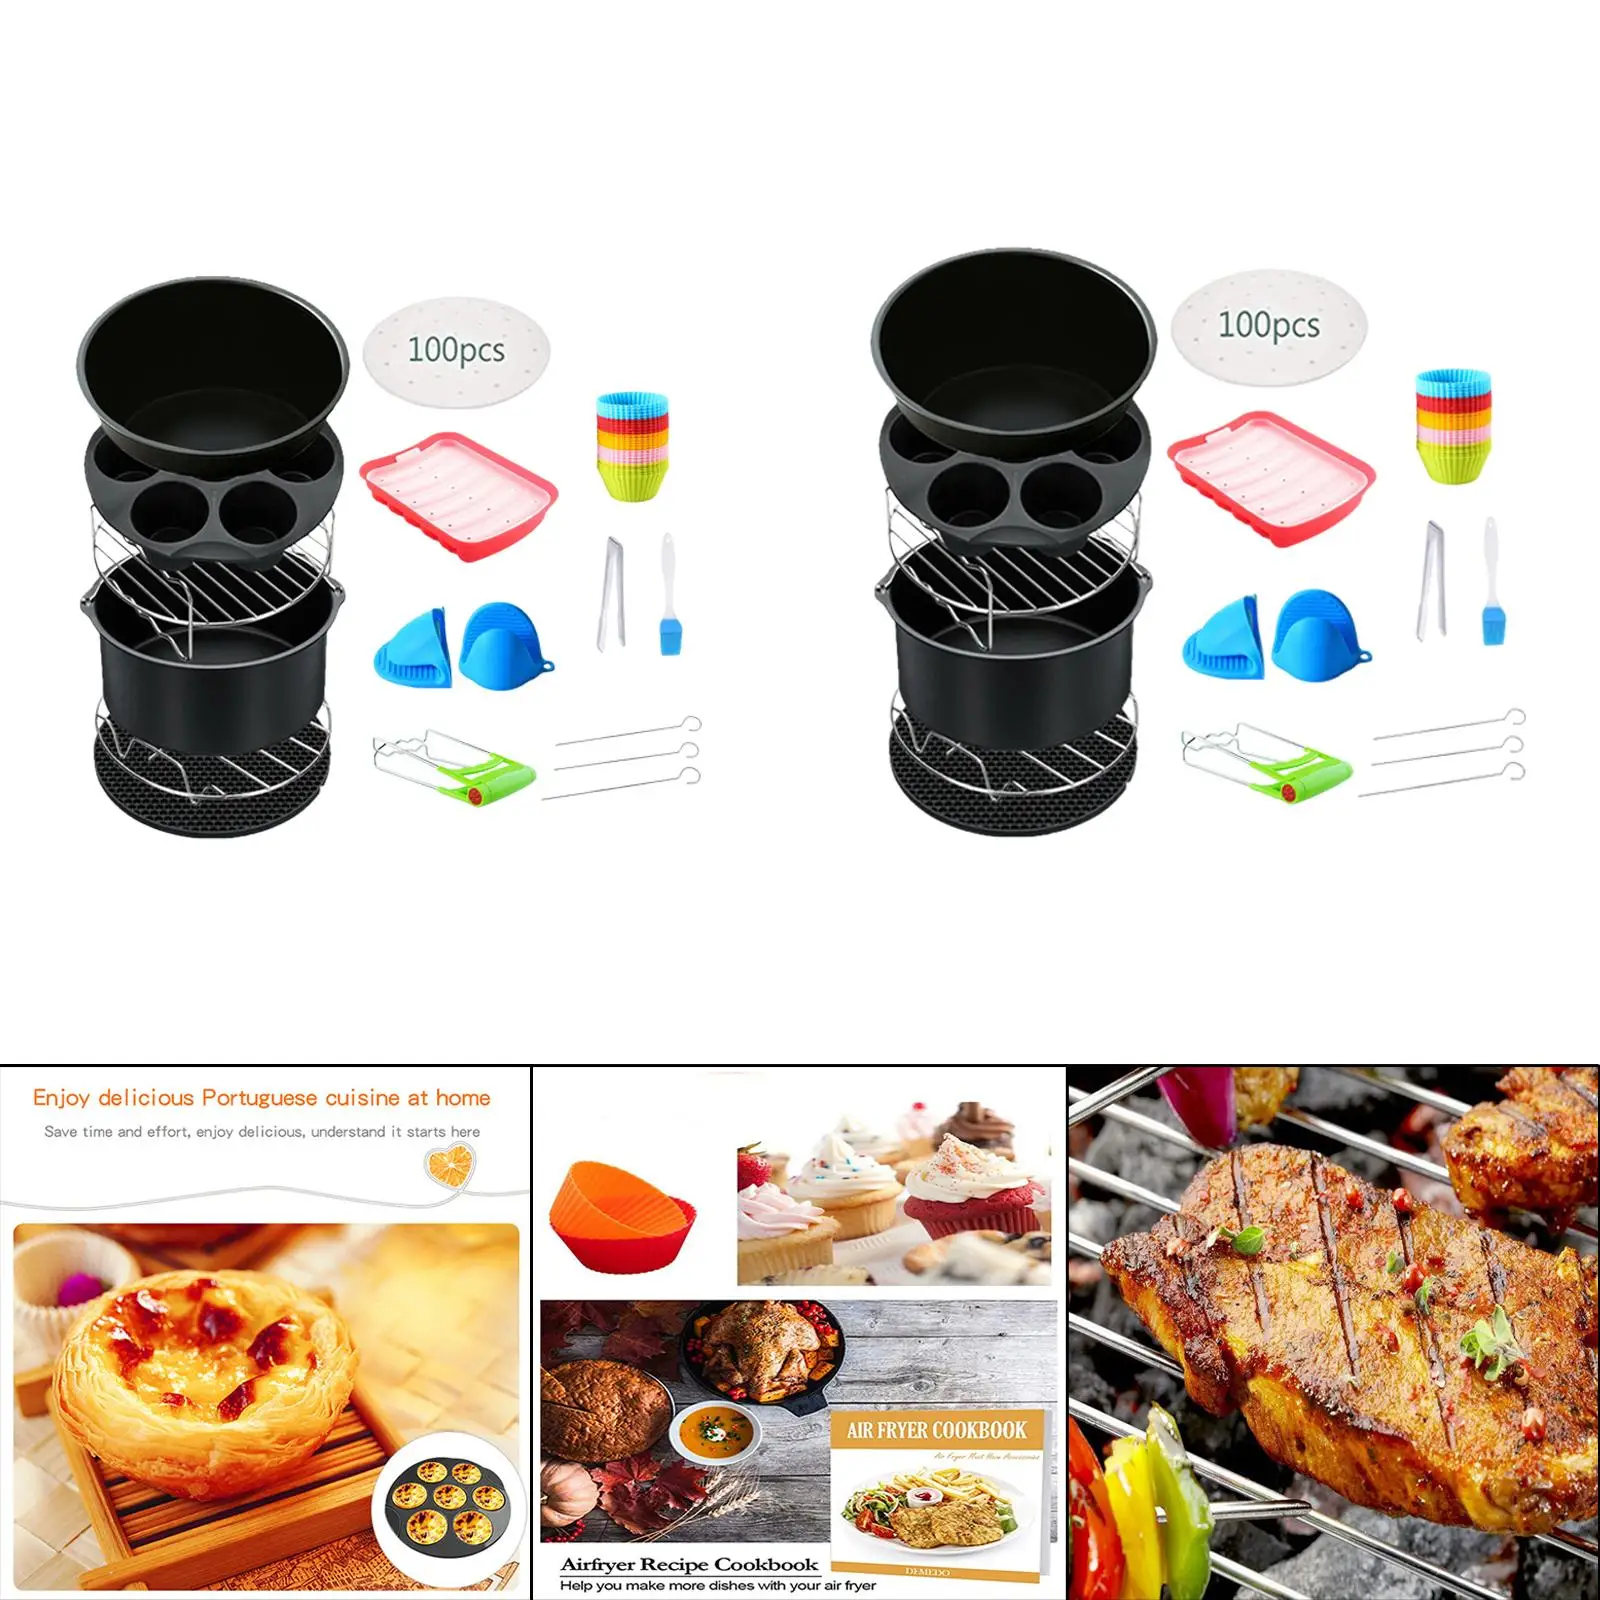 13x fryer Accessories Set Cake Cups with Non Pan Single Layer Steaming Rack Enjoy Your Cooking Time for 3..8 Qt